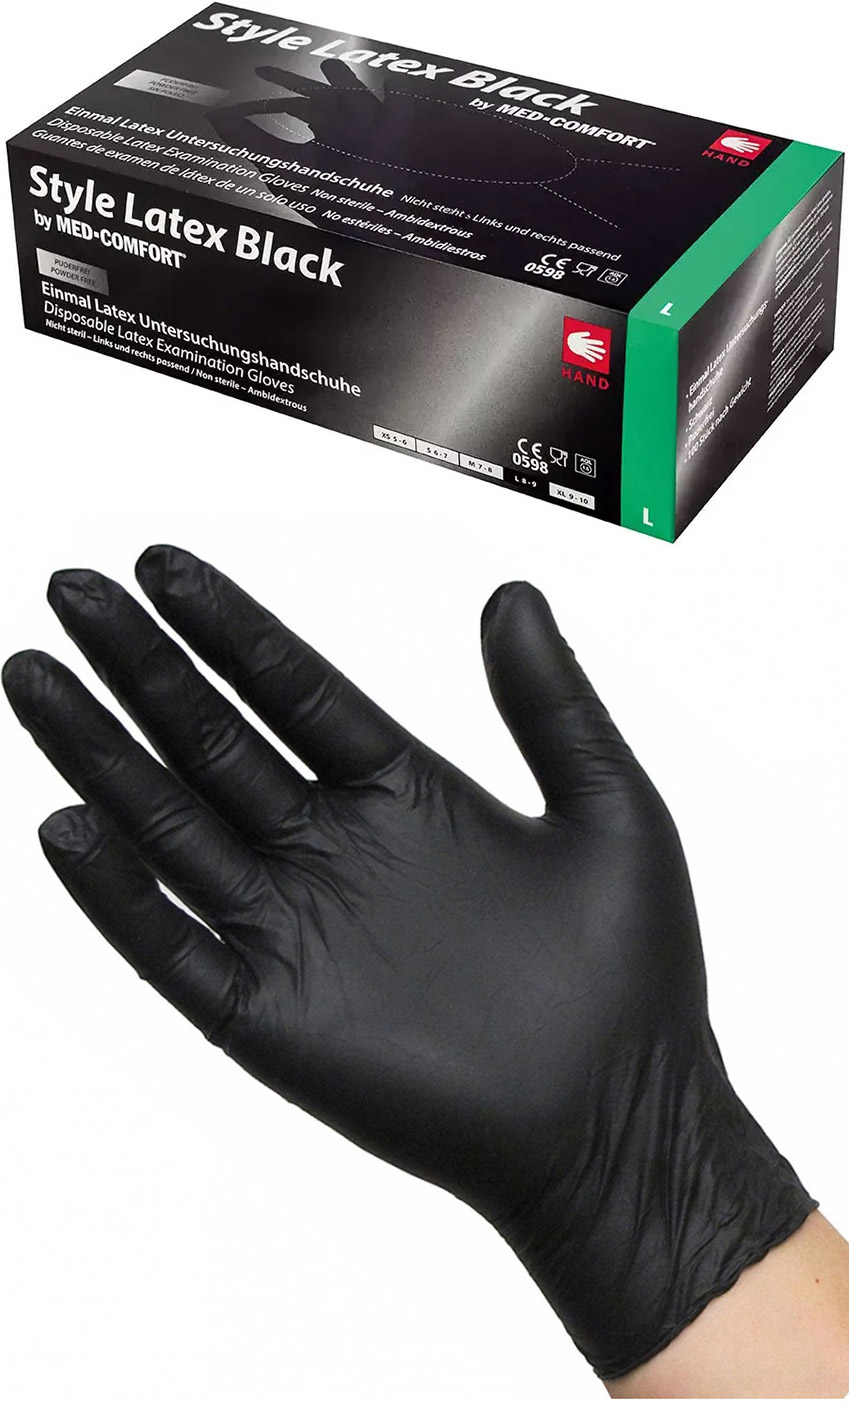 Style Latex Black disposable latex gloves - Black (100 pieces) - L